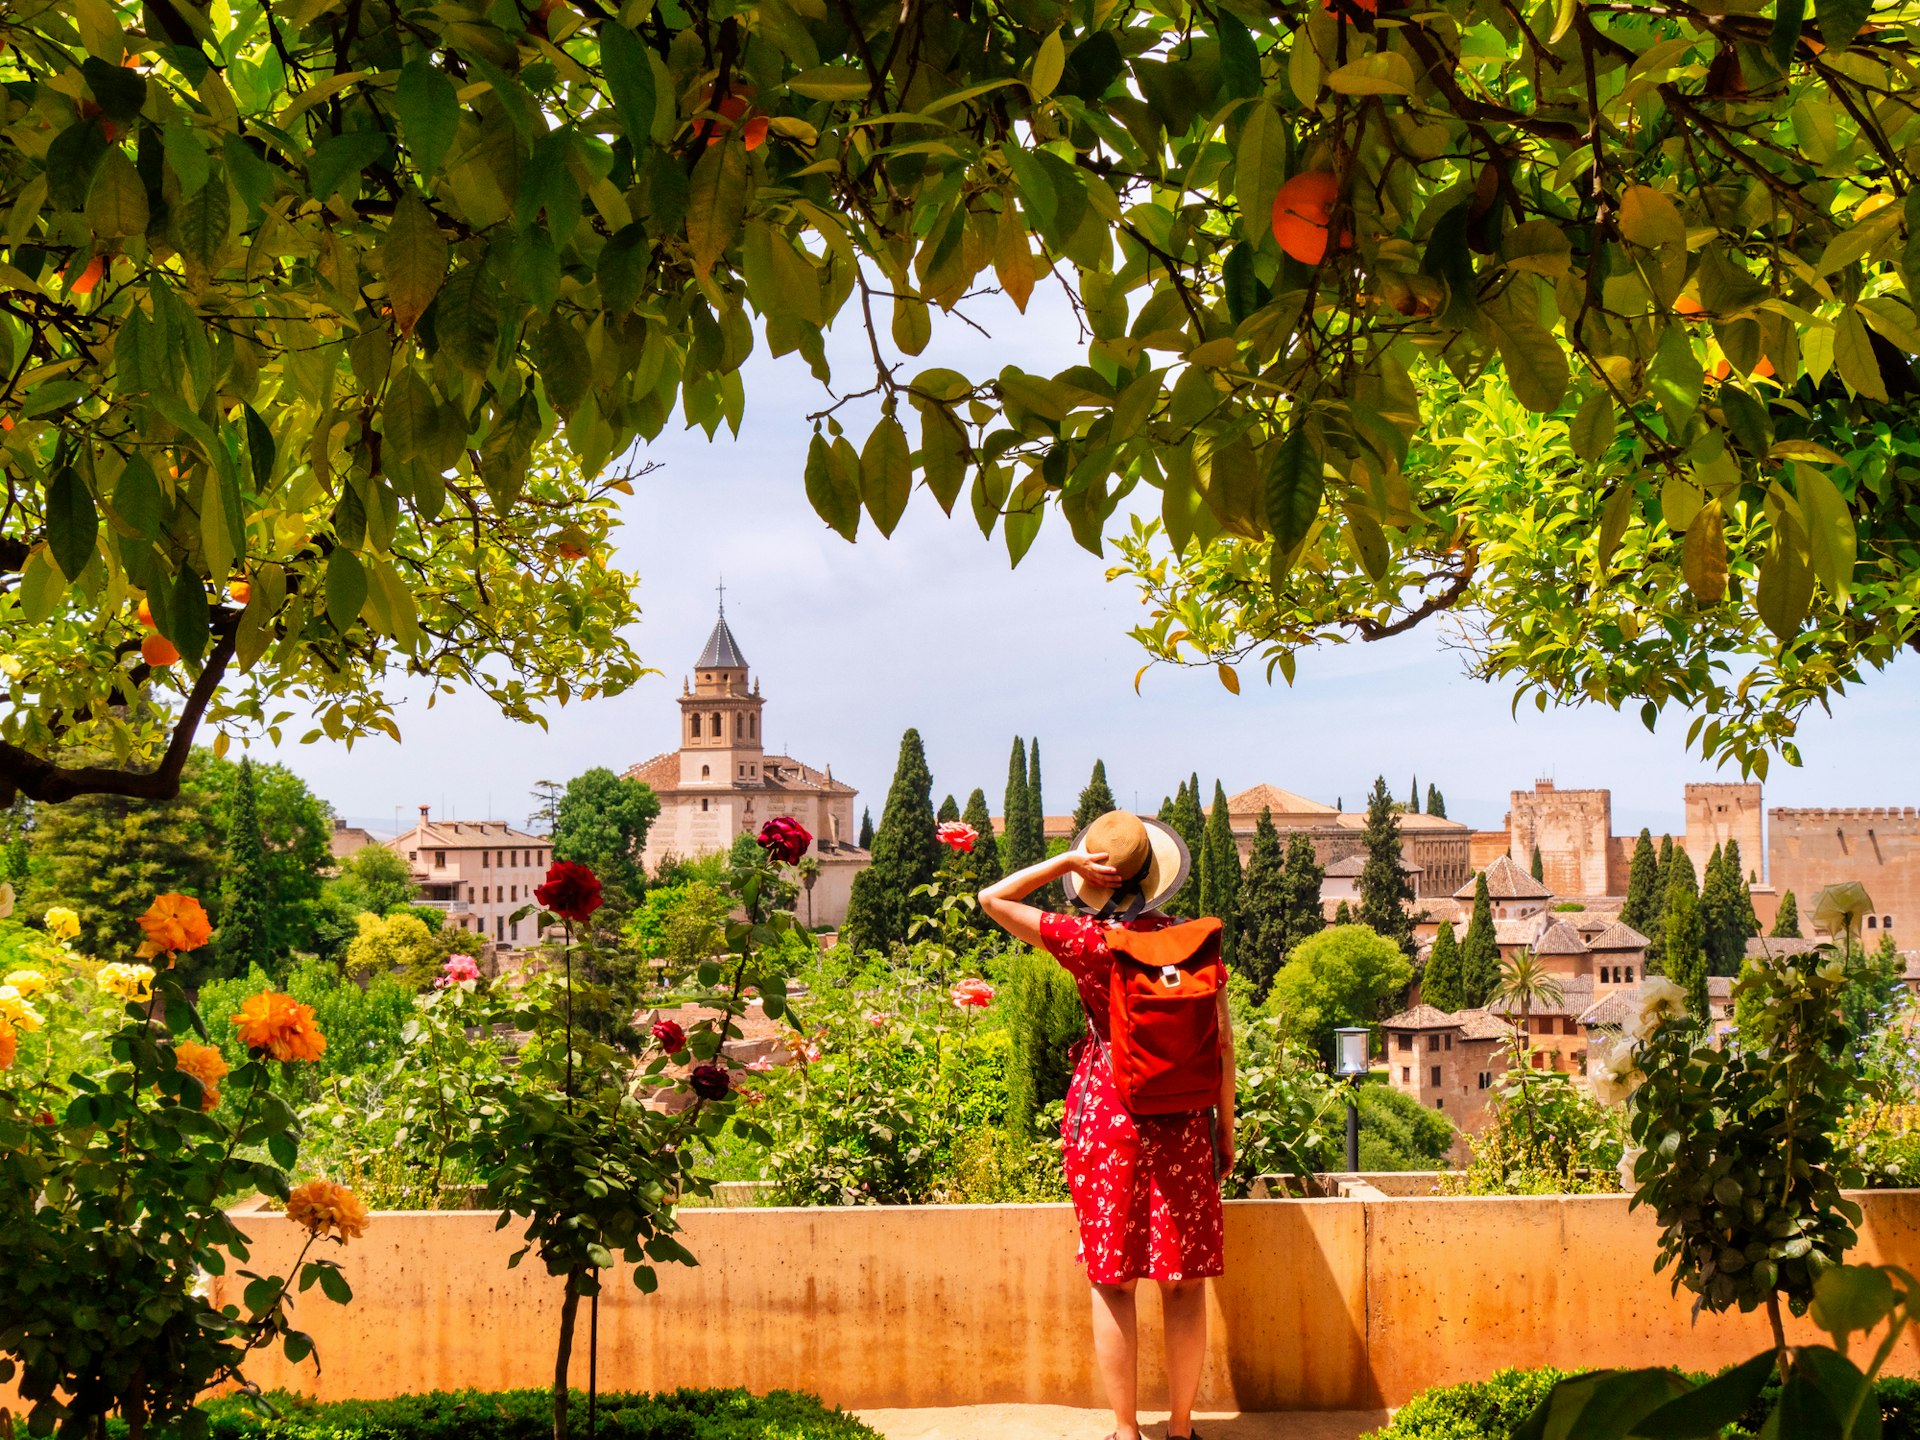 A woman stands beneath orange trees looking at the Alhambra in Granada